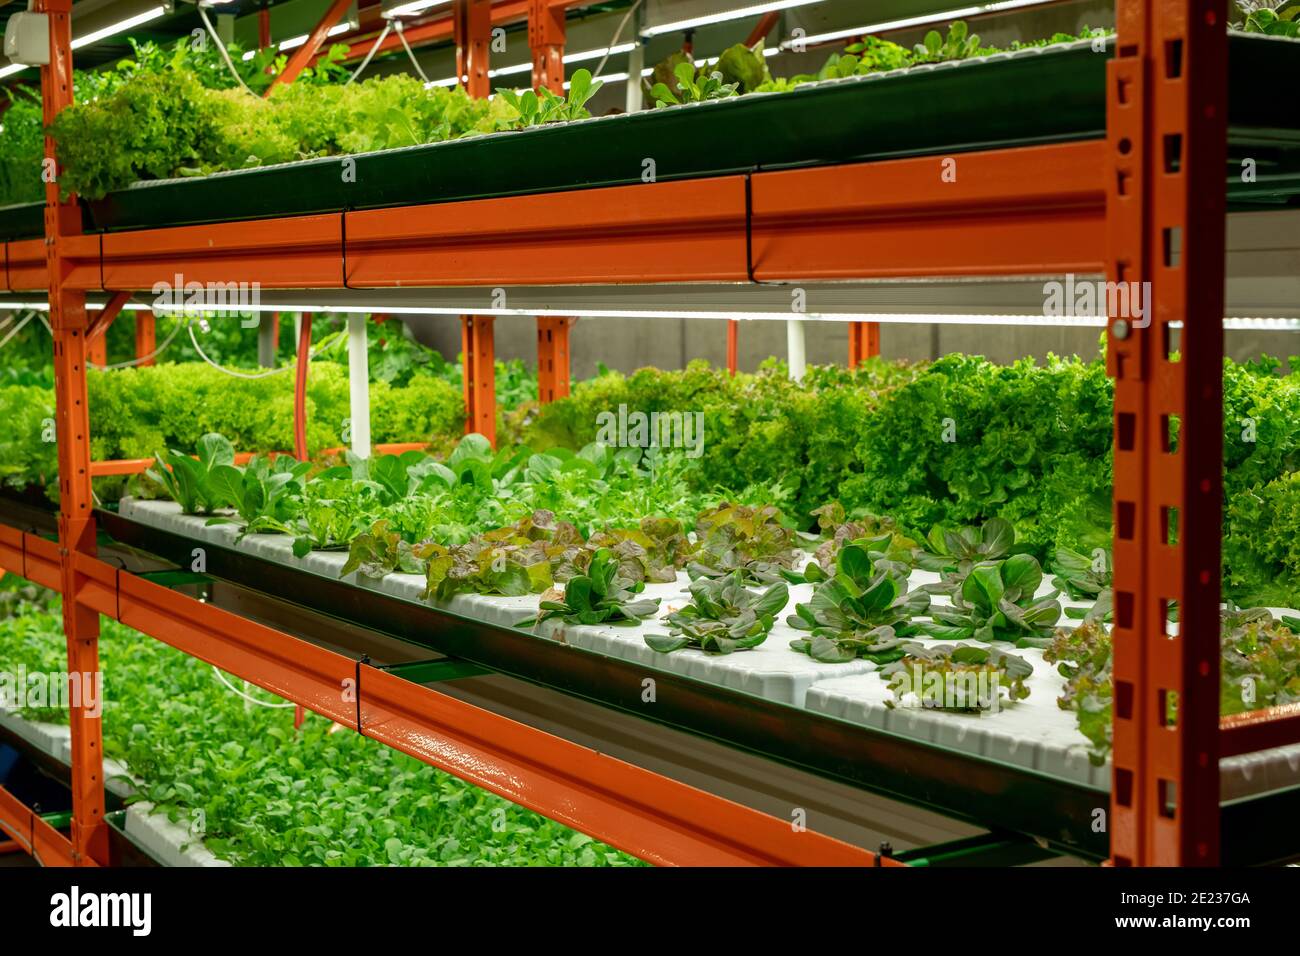 Seedlings of various sorts of lettuce or spinach growing in small pots on shelves inside large contemporary vertical farm or hothouse Stock Photo